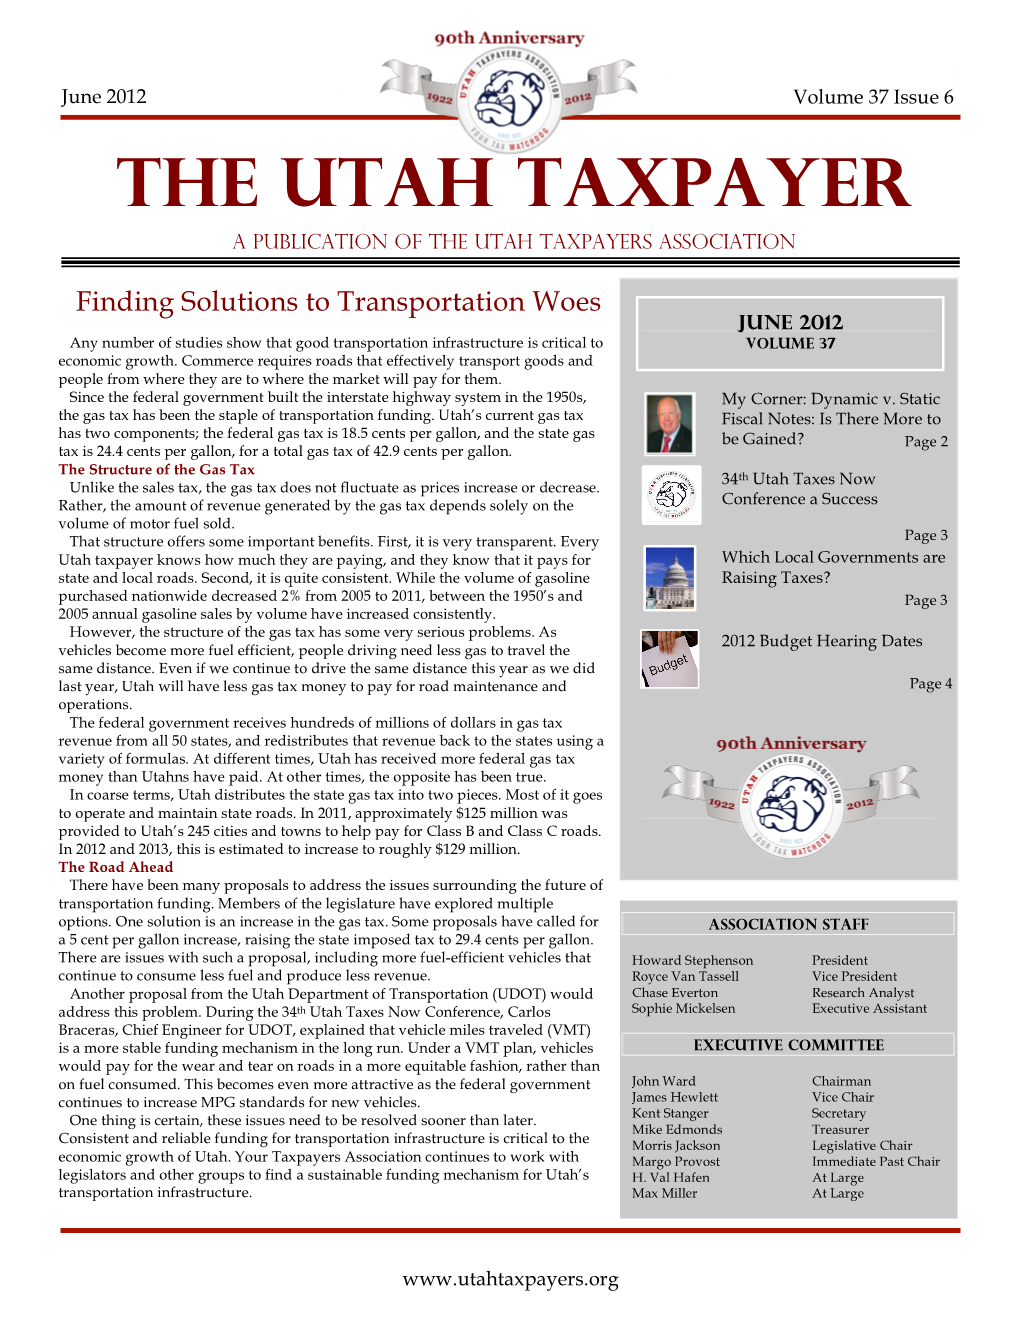 THE UTAH TAXPAYER a Publication of the Utah Taxpayers Association